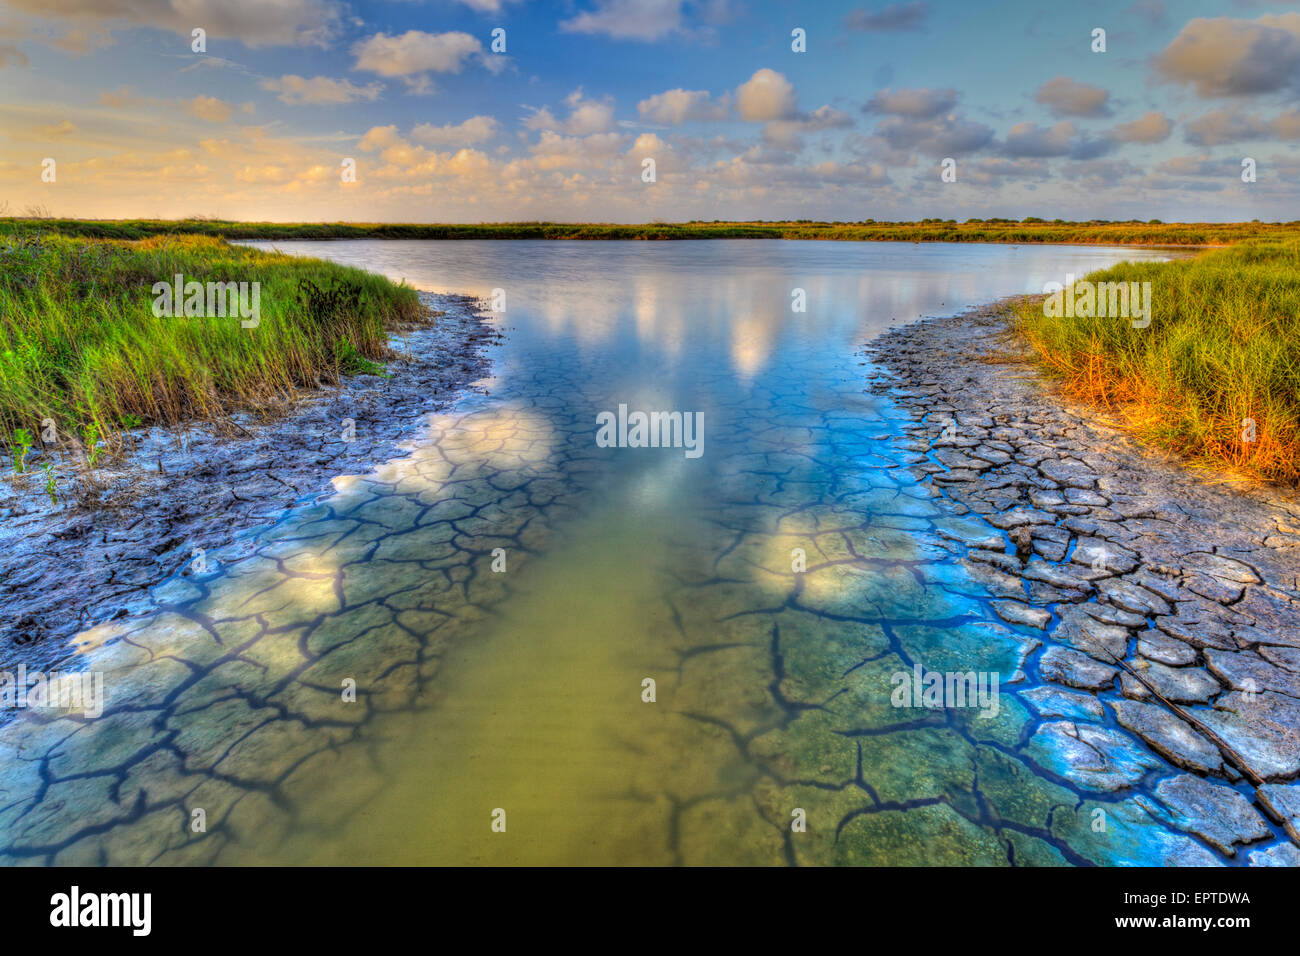 South Texas wetland are showing the effect of drought in tidal pools near the Gulf Coast Stock Photo